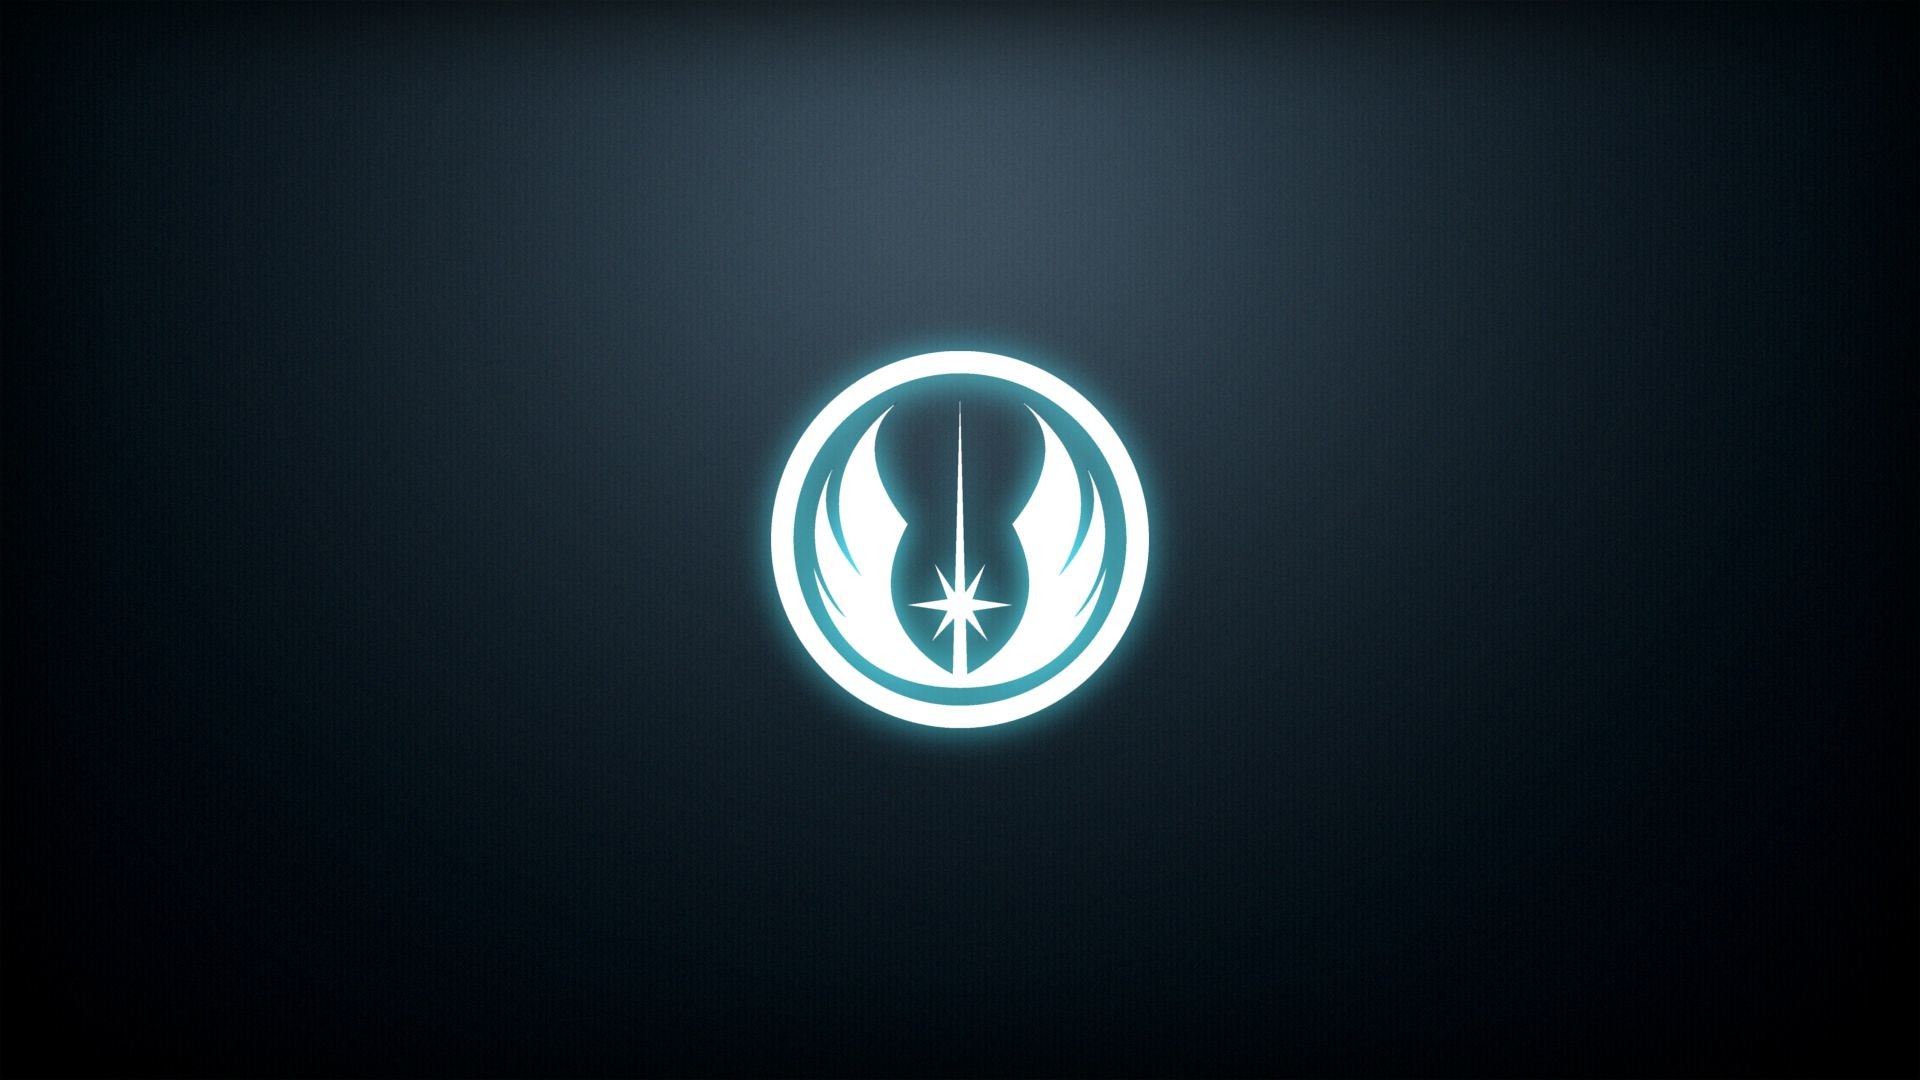 A wallpaper you guys might like. The Jedi Order emblem. Ill do a Sith one too if people want me to. 1920×1080